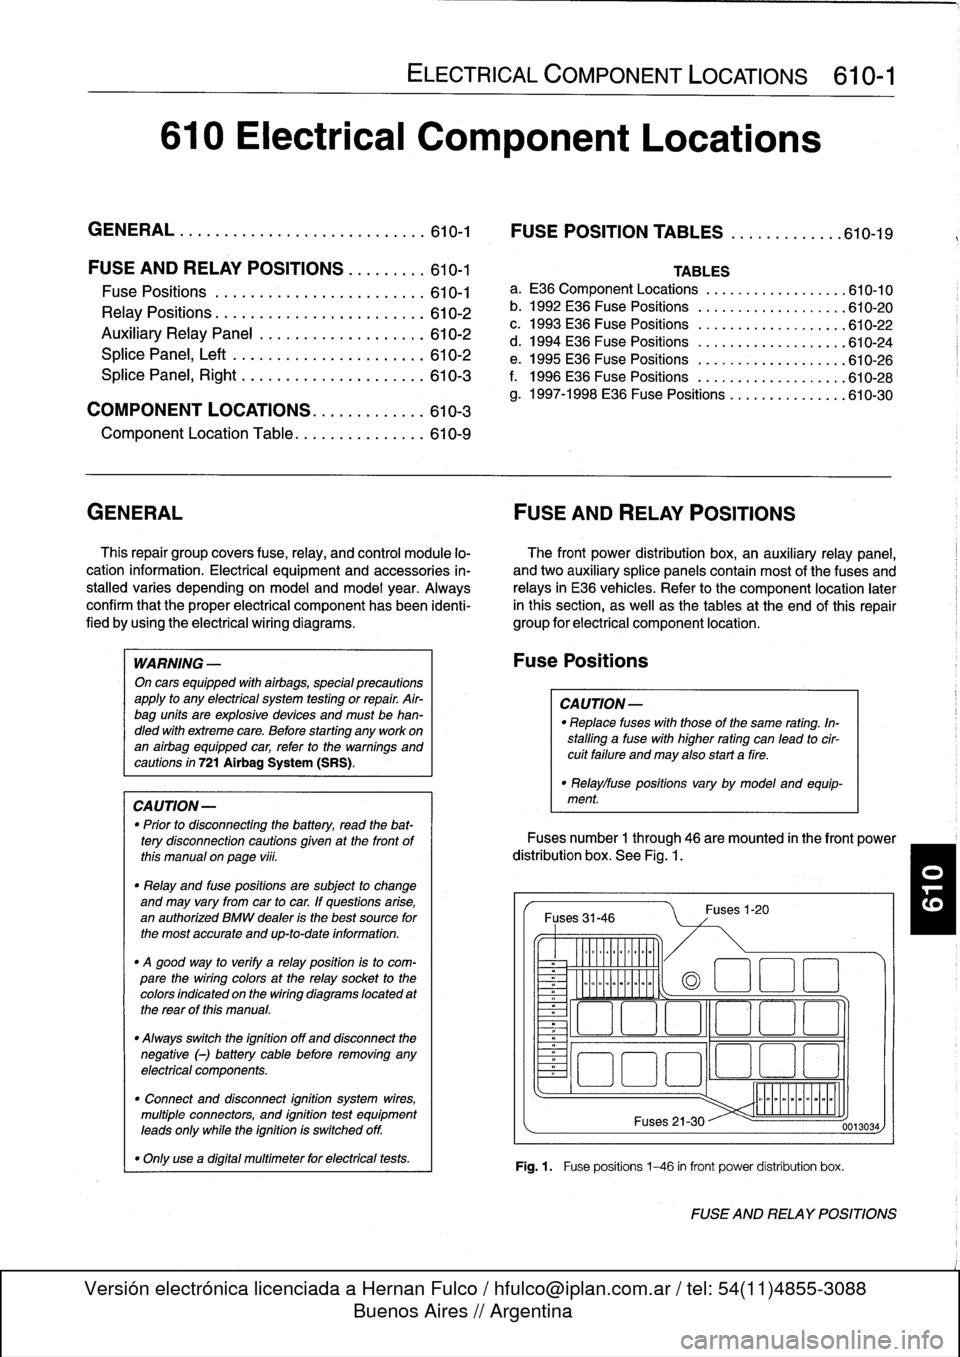 BMW M3 1993 E36 Workshop Manual 
610
Electrical
Component
Locations

GENERAL
...........
.
.
.
.
.
.
.
.
.
........
610-1

	

FOSE
POSITION
TABLES
..
.
.
.
.
.
.....
.
610-19

FUSE
AND
RELAY
POSITIONS
.
...
.
.
.
.
.
610-1

Fuse
Pos